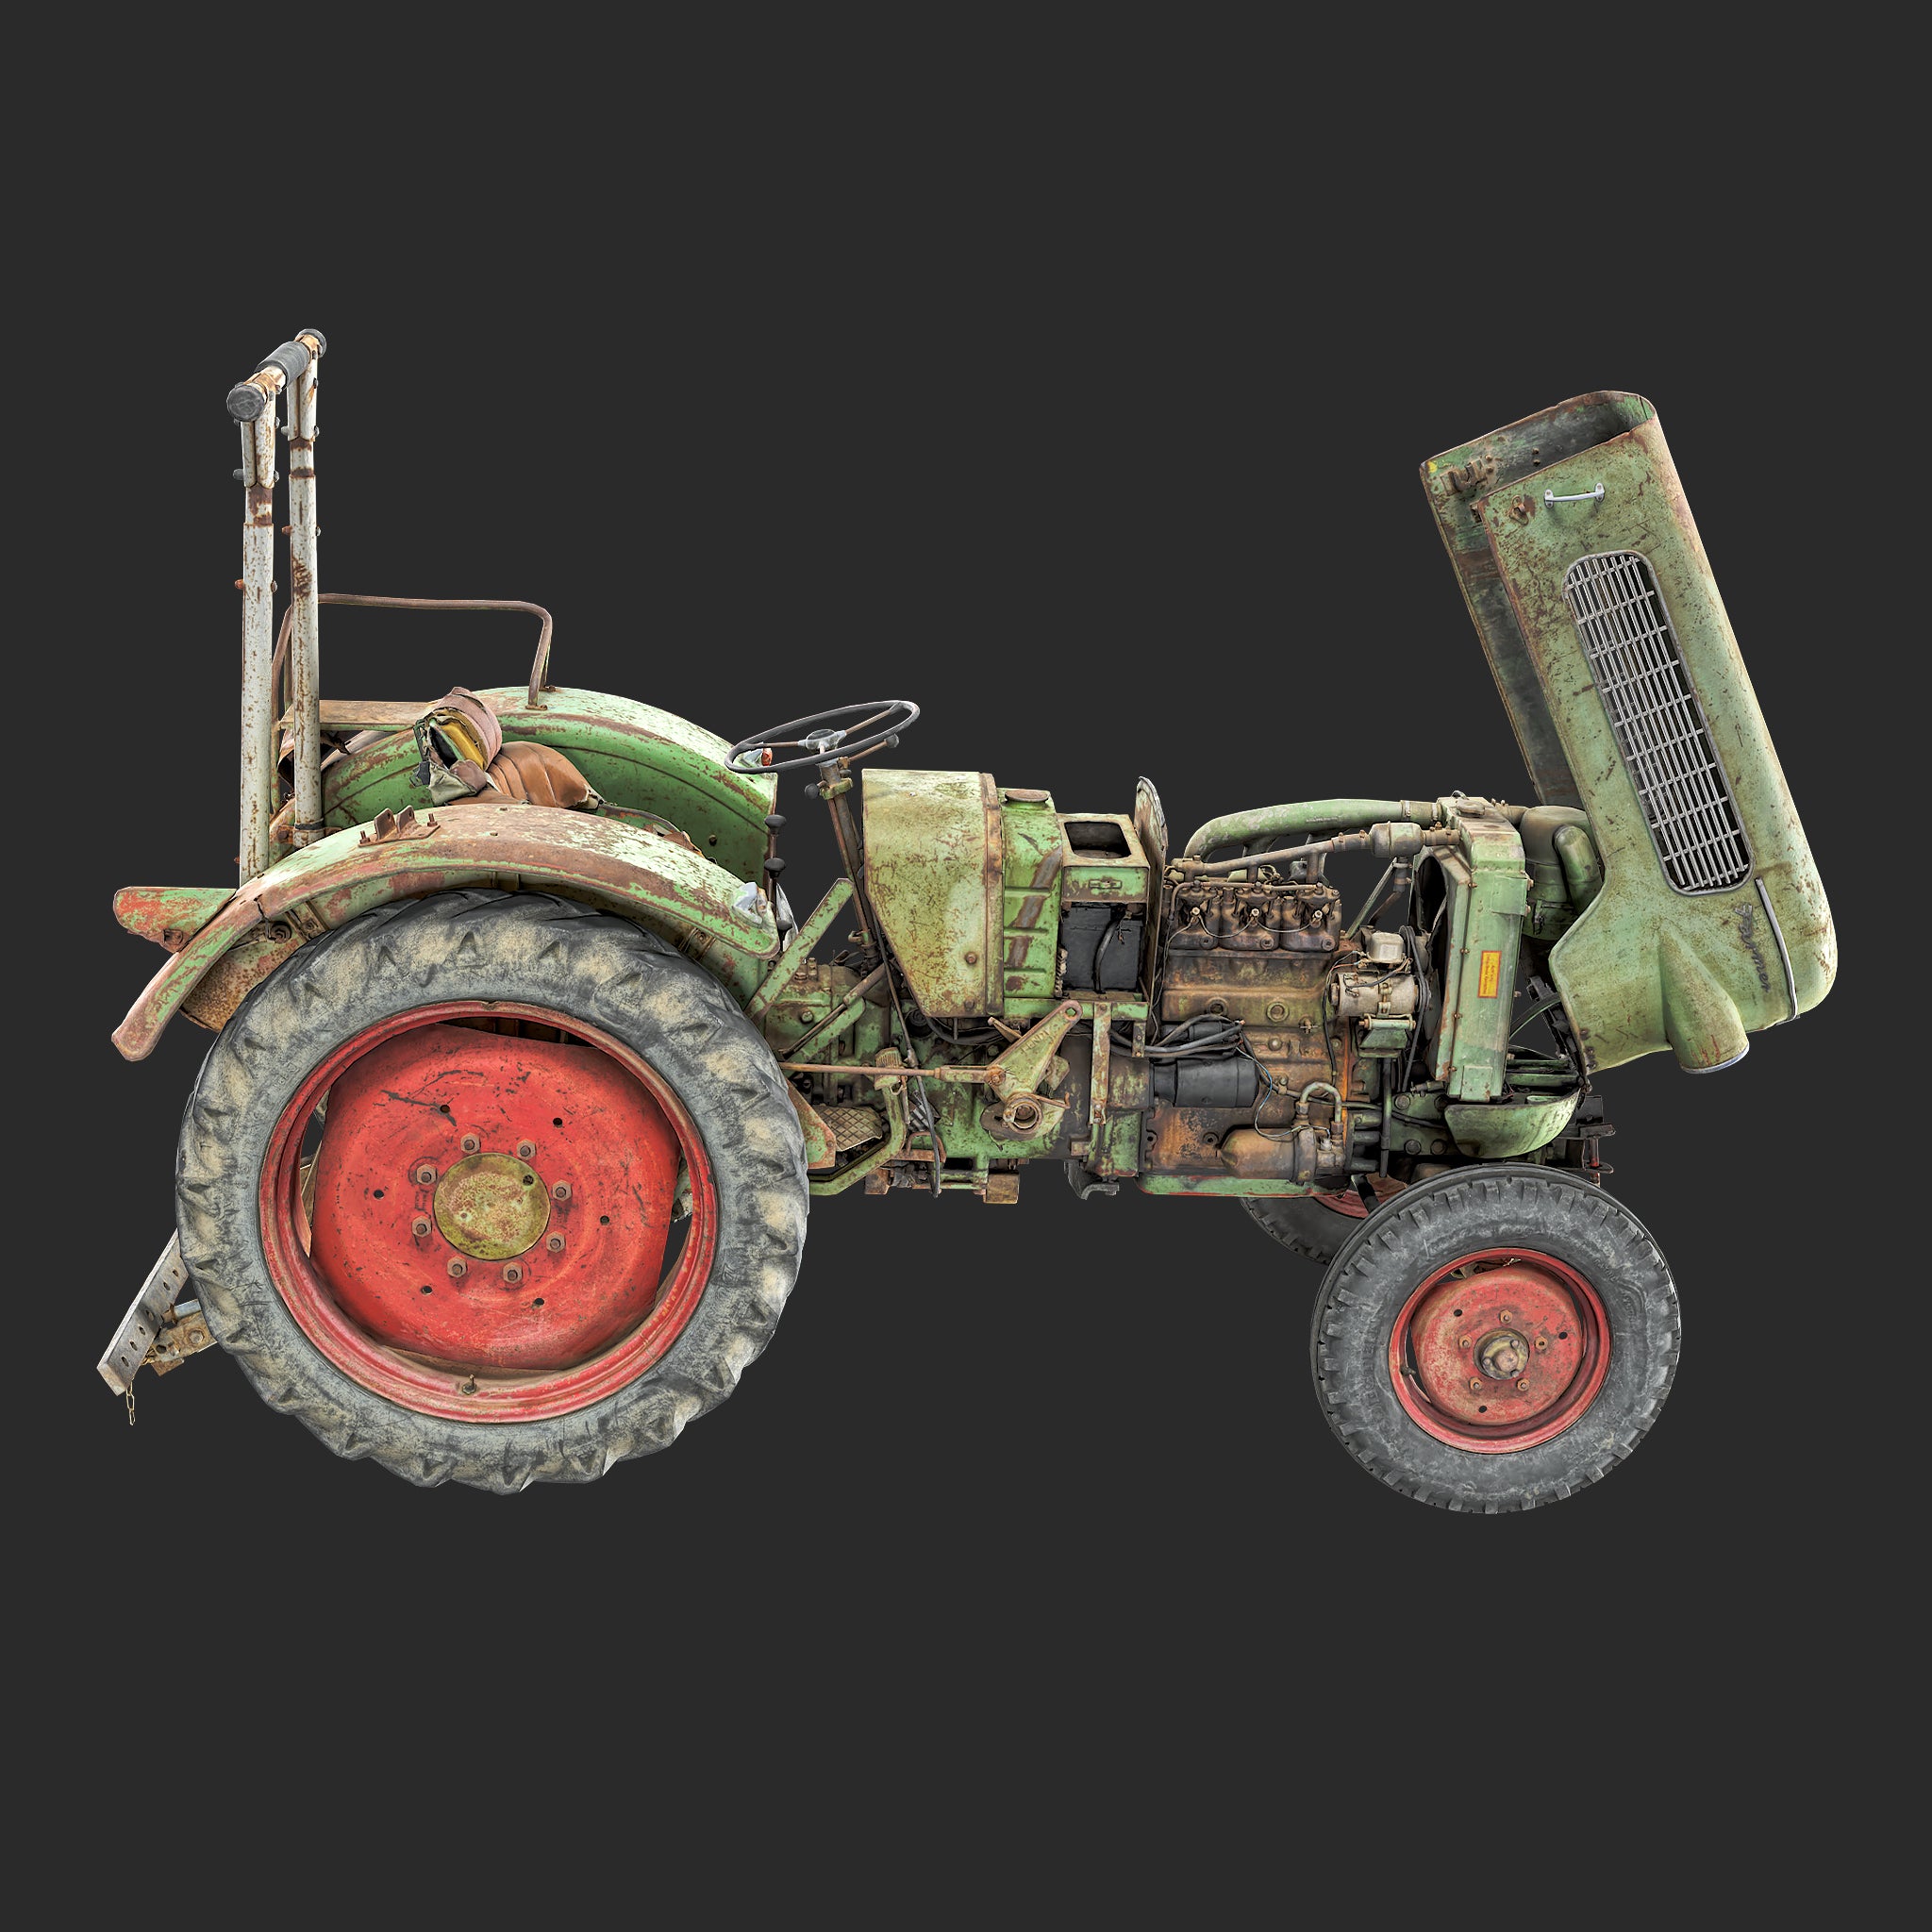 Realistic rendering of a 3D model of Open used rusty Vintage Tractor - side view